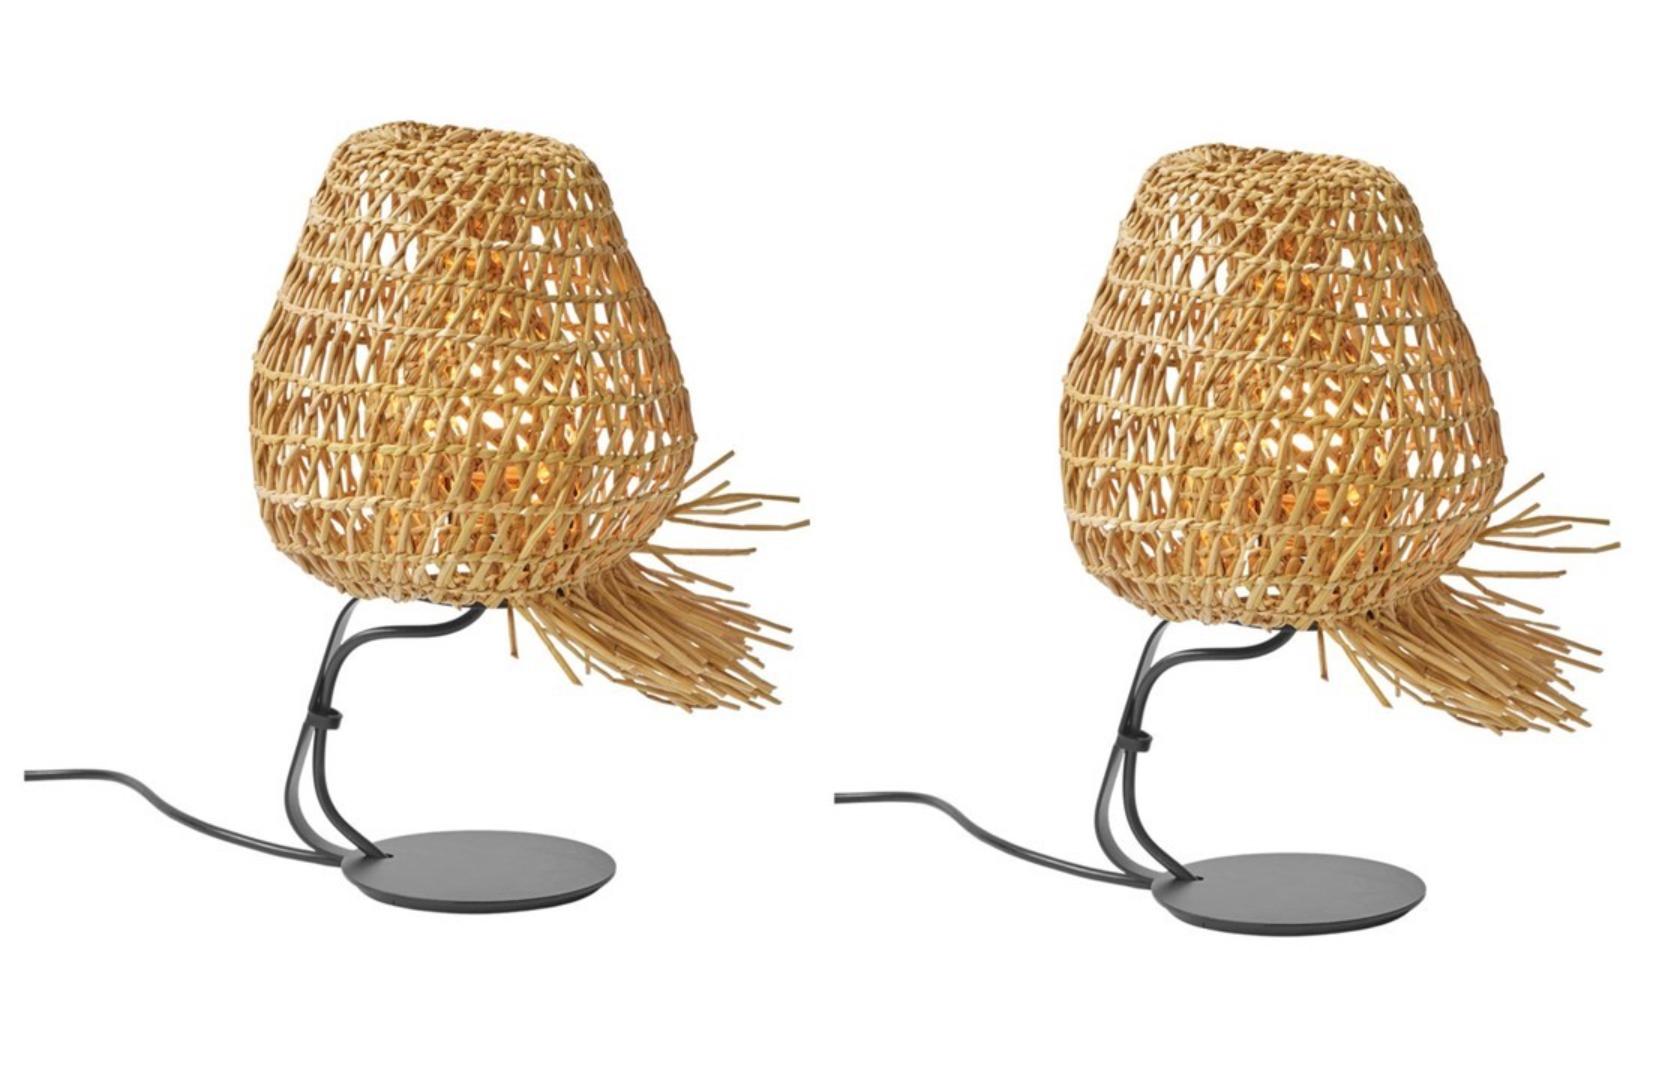 Set of 2 vegetable Fabrics N°6 nest table lamps by Estudio Rafael Freyre
Dimensions: D 30 x H 40 cm 
Materials: Reed, metal.

Vegetable Fabrics brings us closer to the processes of growth and transformation of the plant organism, posing a